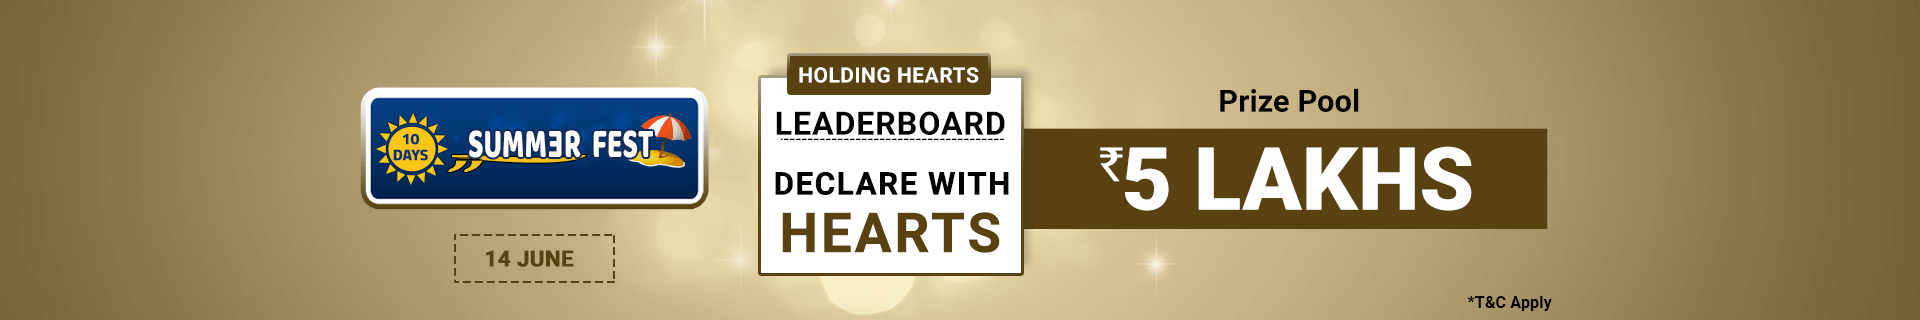 Holding Hearts Leaderboard Contest